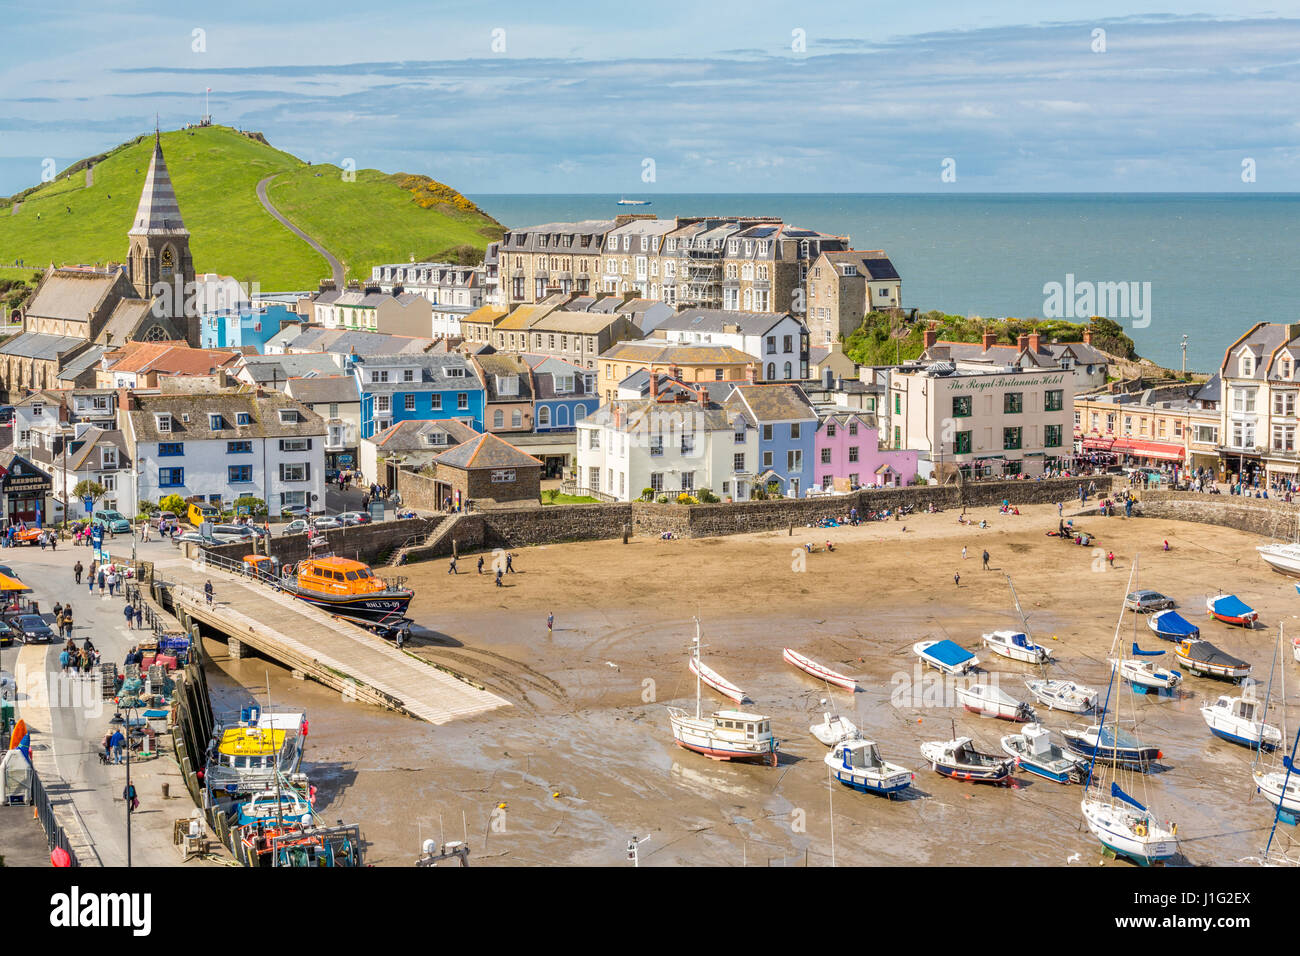 Ilfracombe,North Devon,UK. A pretty and popular Victorian seaside resort with breathtaking views, beaches, harbour and quay located in Devon England Stock Photo